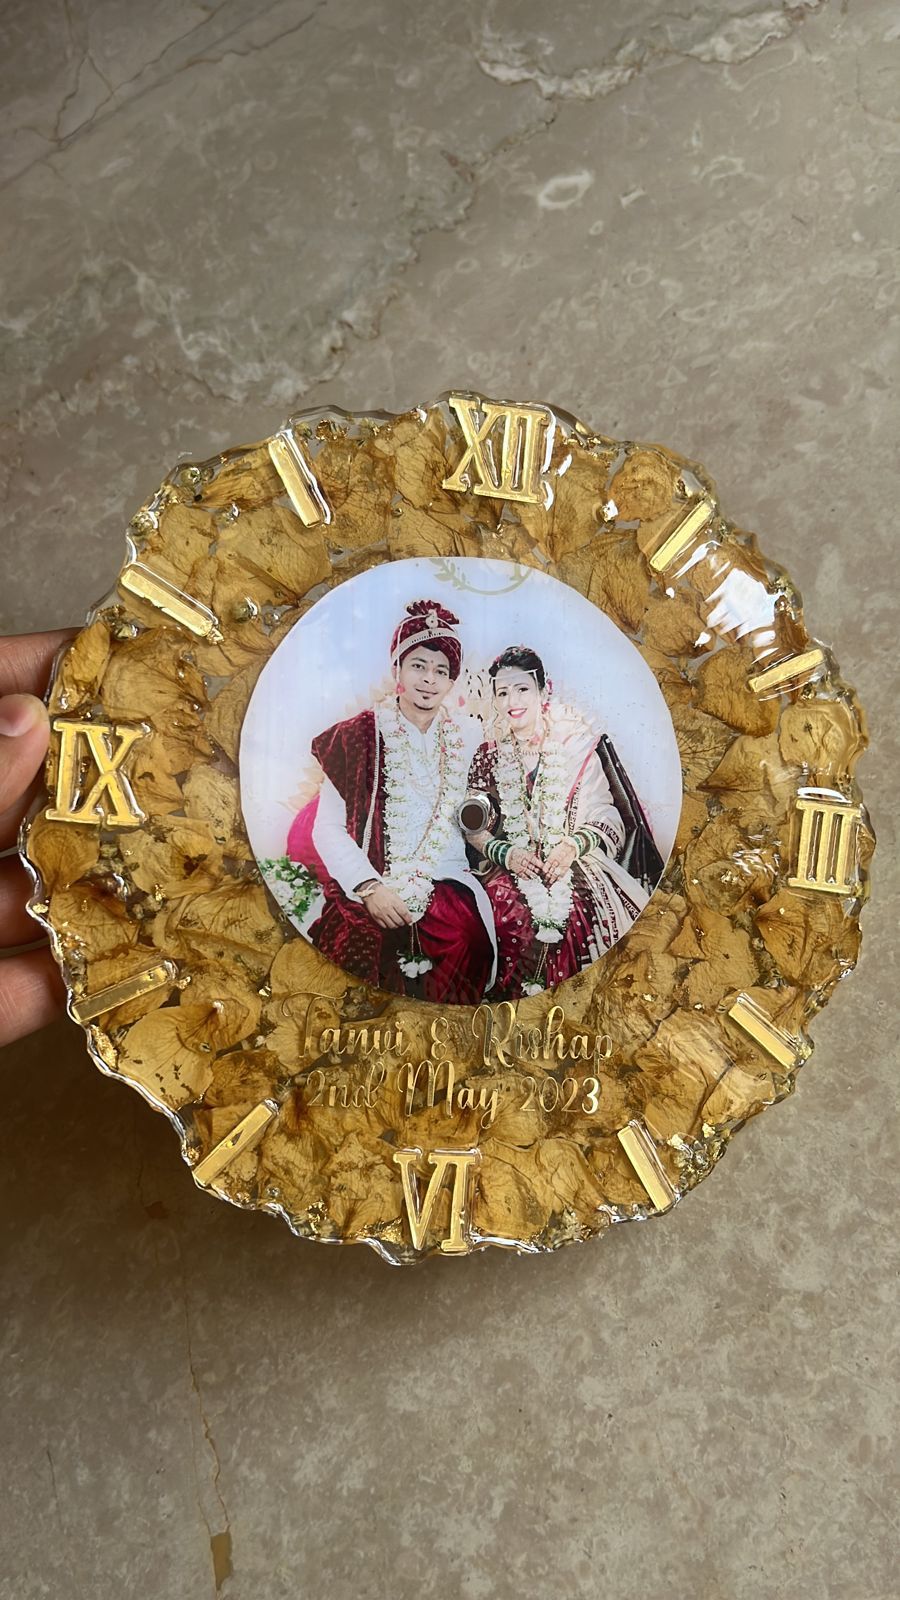 Handcrafted Flower Preservation Clock with Couple's Photo - 8 Inches